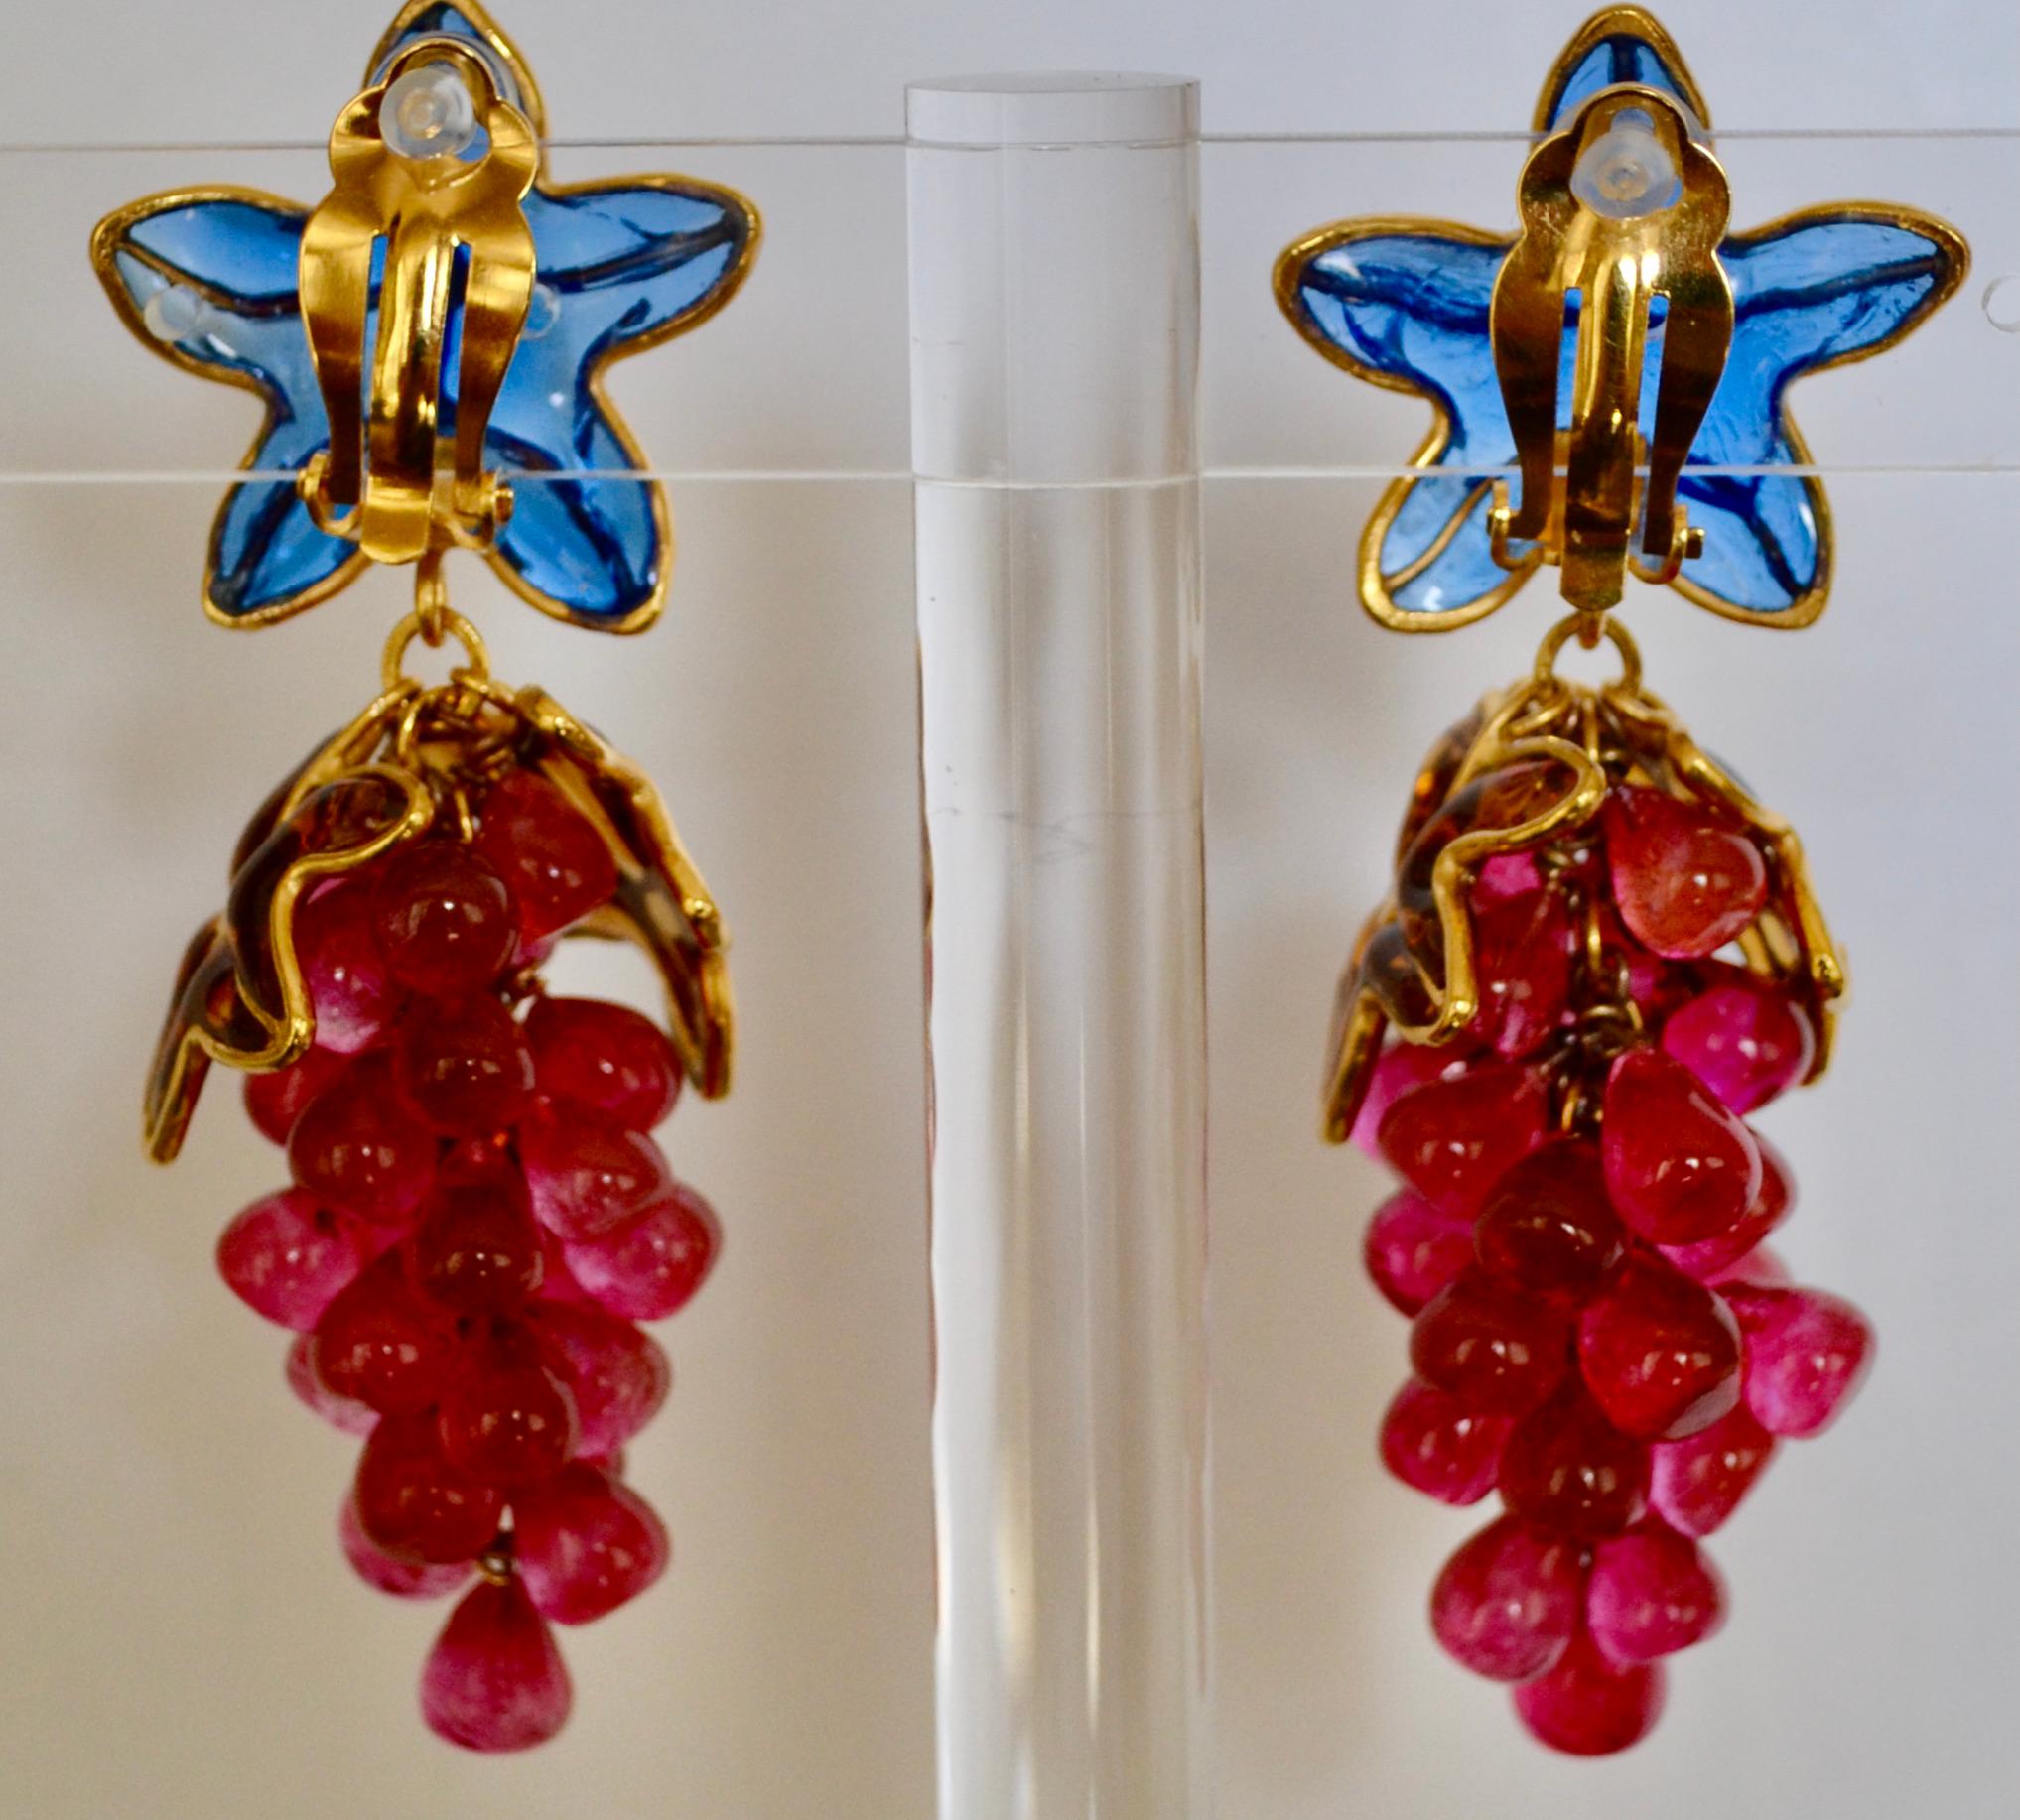 Delicate cascading of fuchsia beads, gold and blue leaves earrings, made in Pate de verre.An intricate process used by the atelier de Gripoix for the House of Chanel.
These earrings were made by former artisans of the atelier of Gripoix. Set on